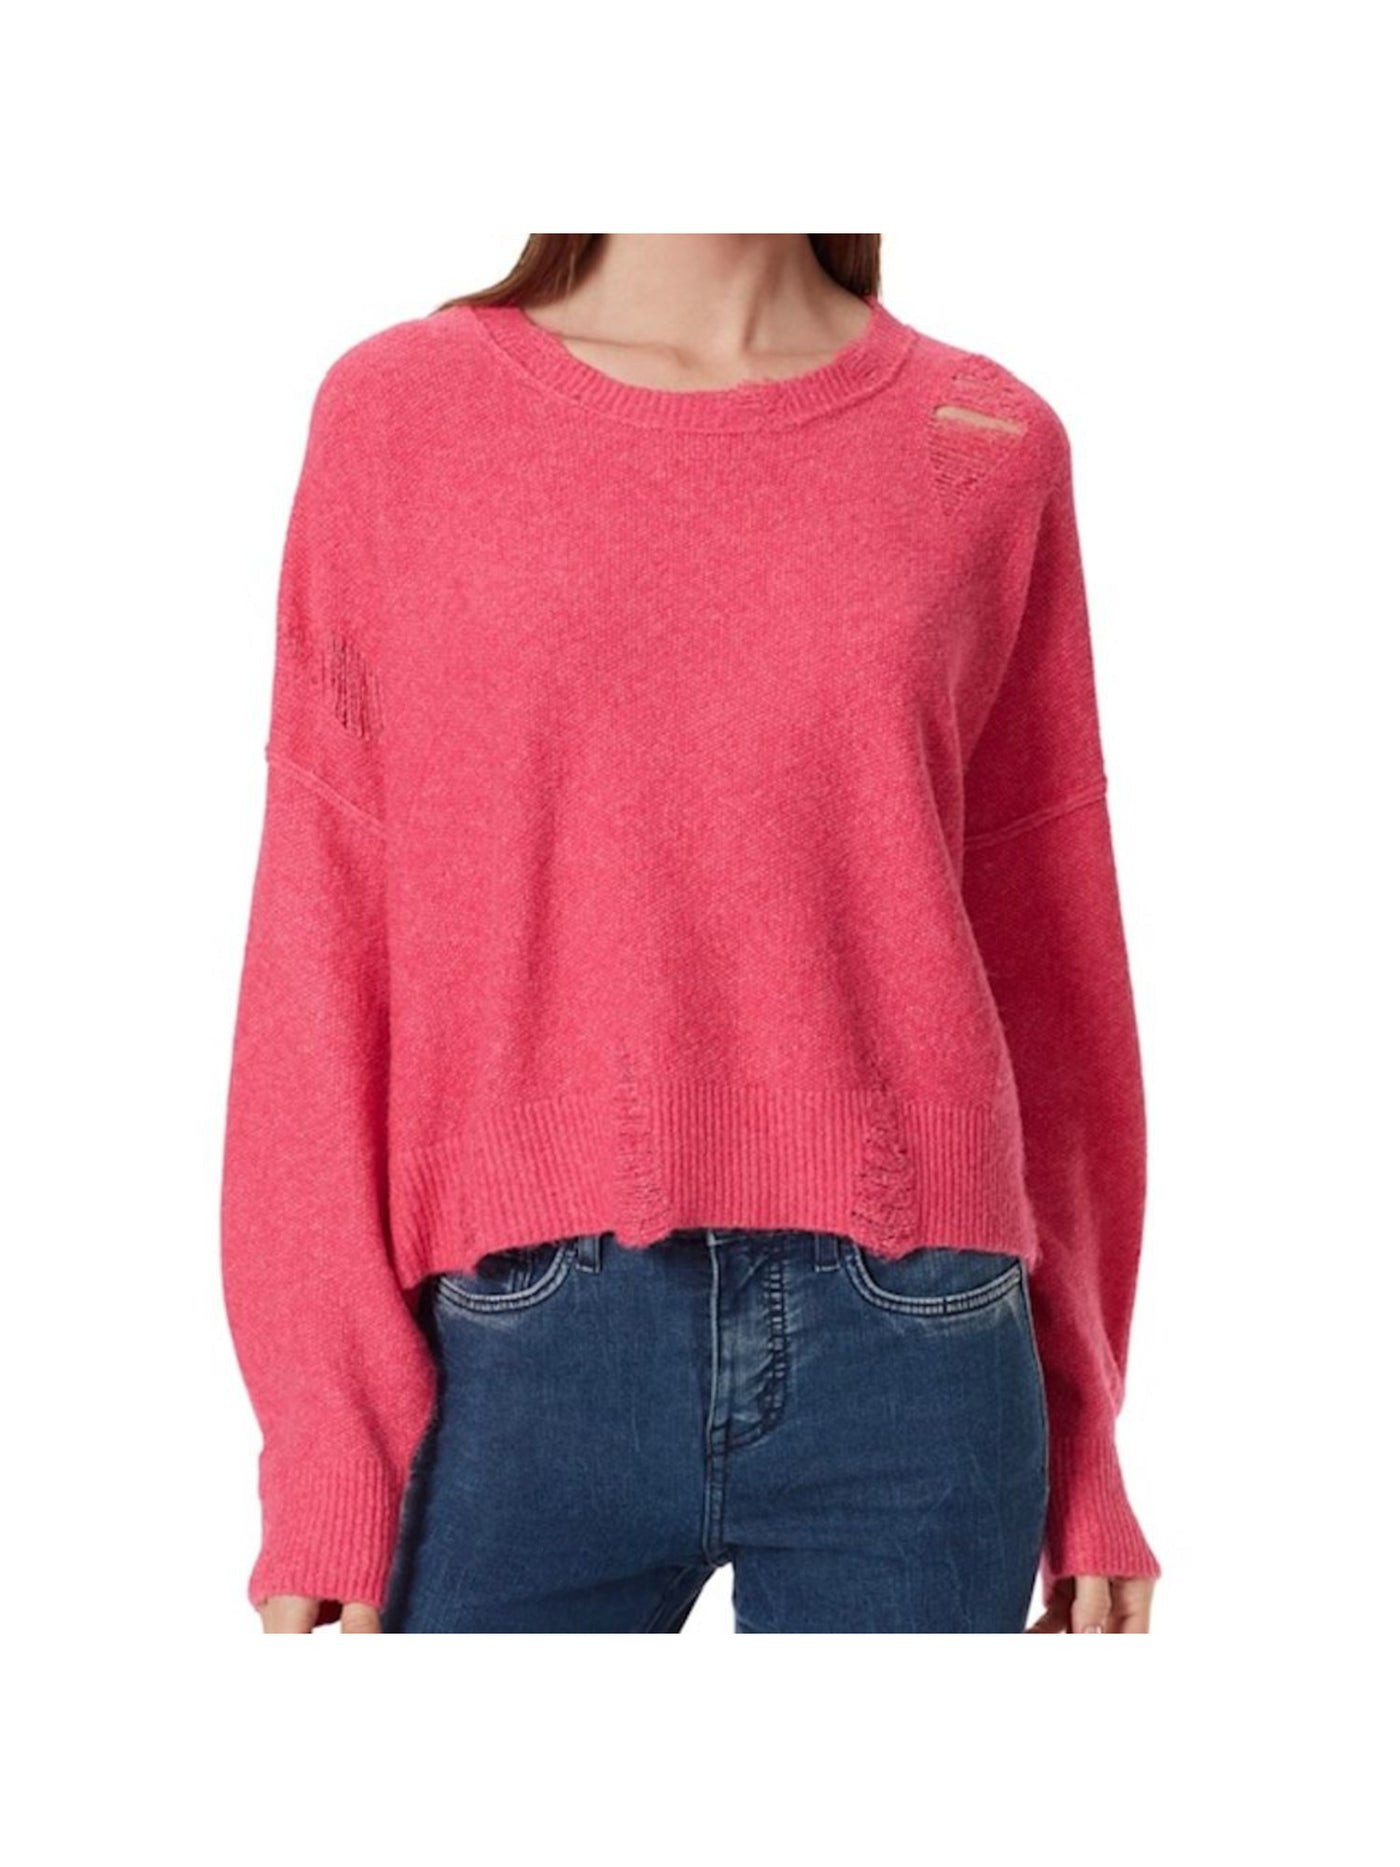 FRAYED JEANS Womens Pink Ribbed Distressed Heather Long Sleeve Round Neck Sweater L